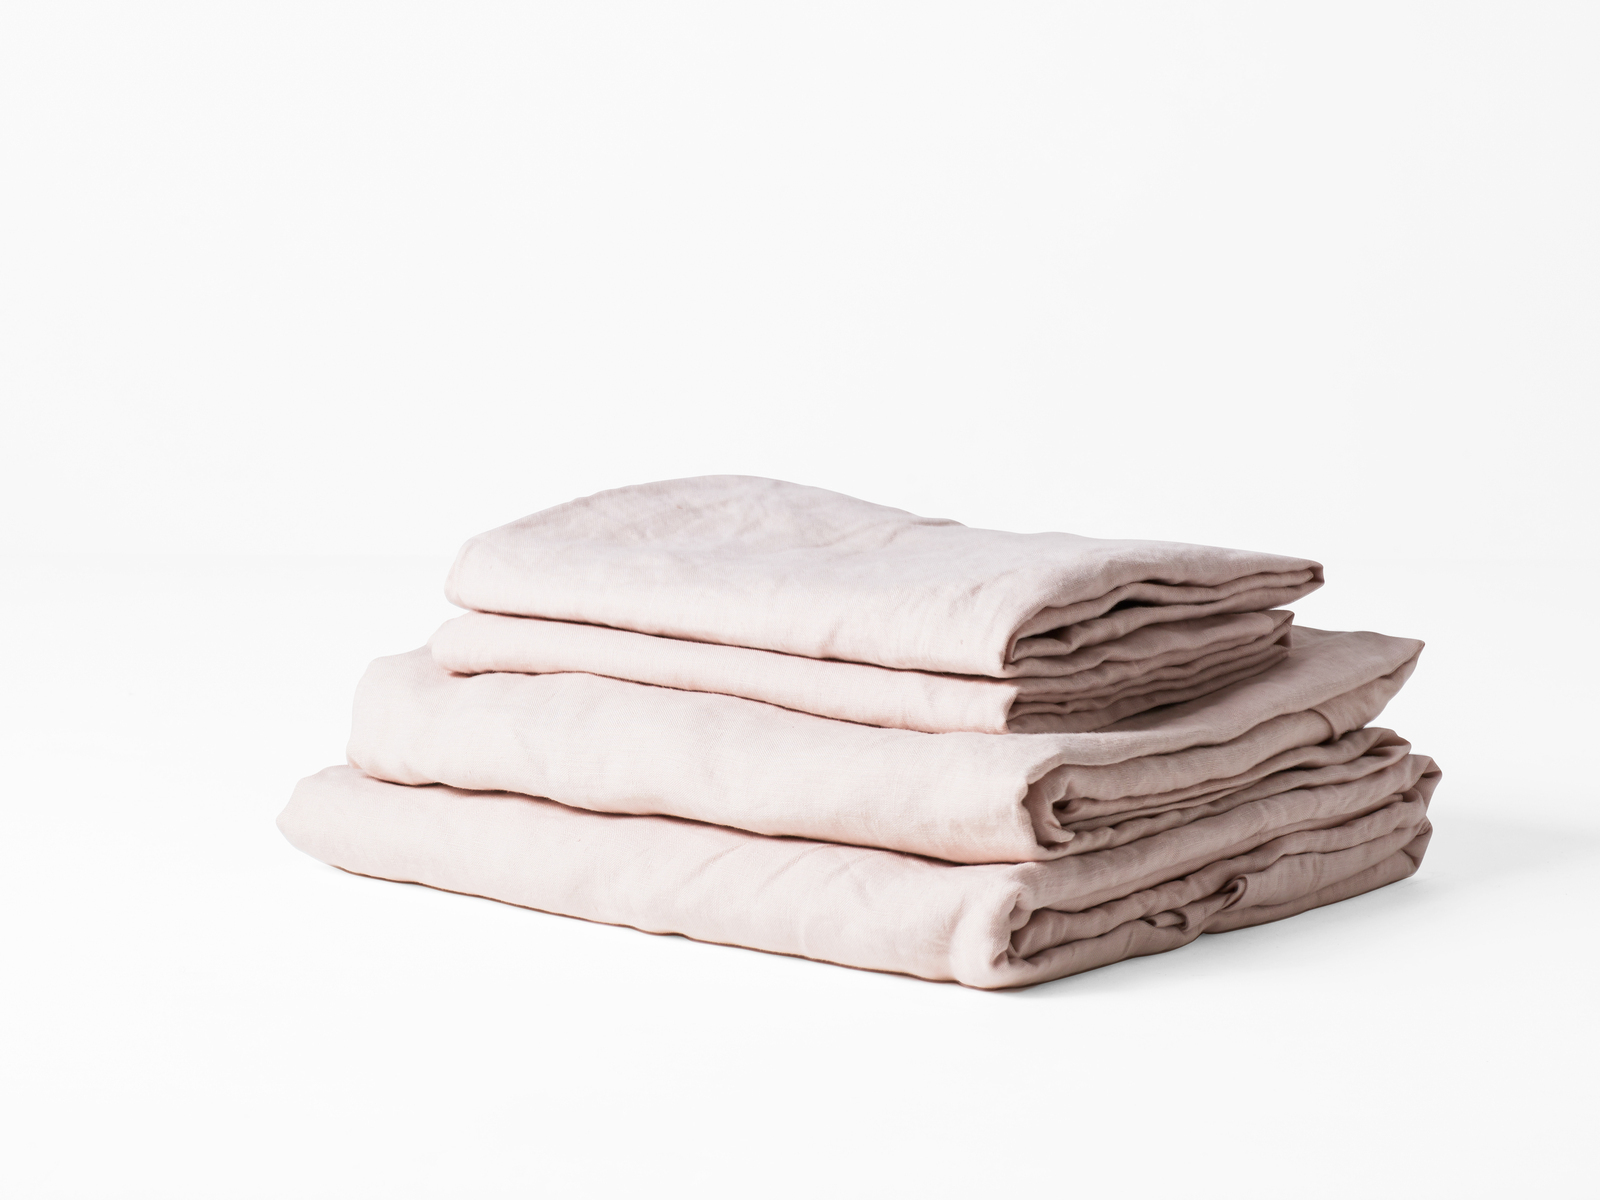 French Linen - Sheet Sets